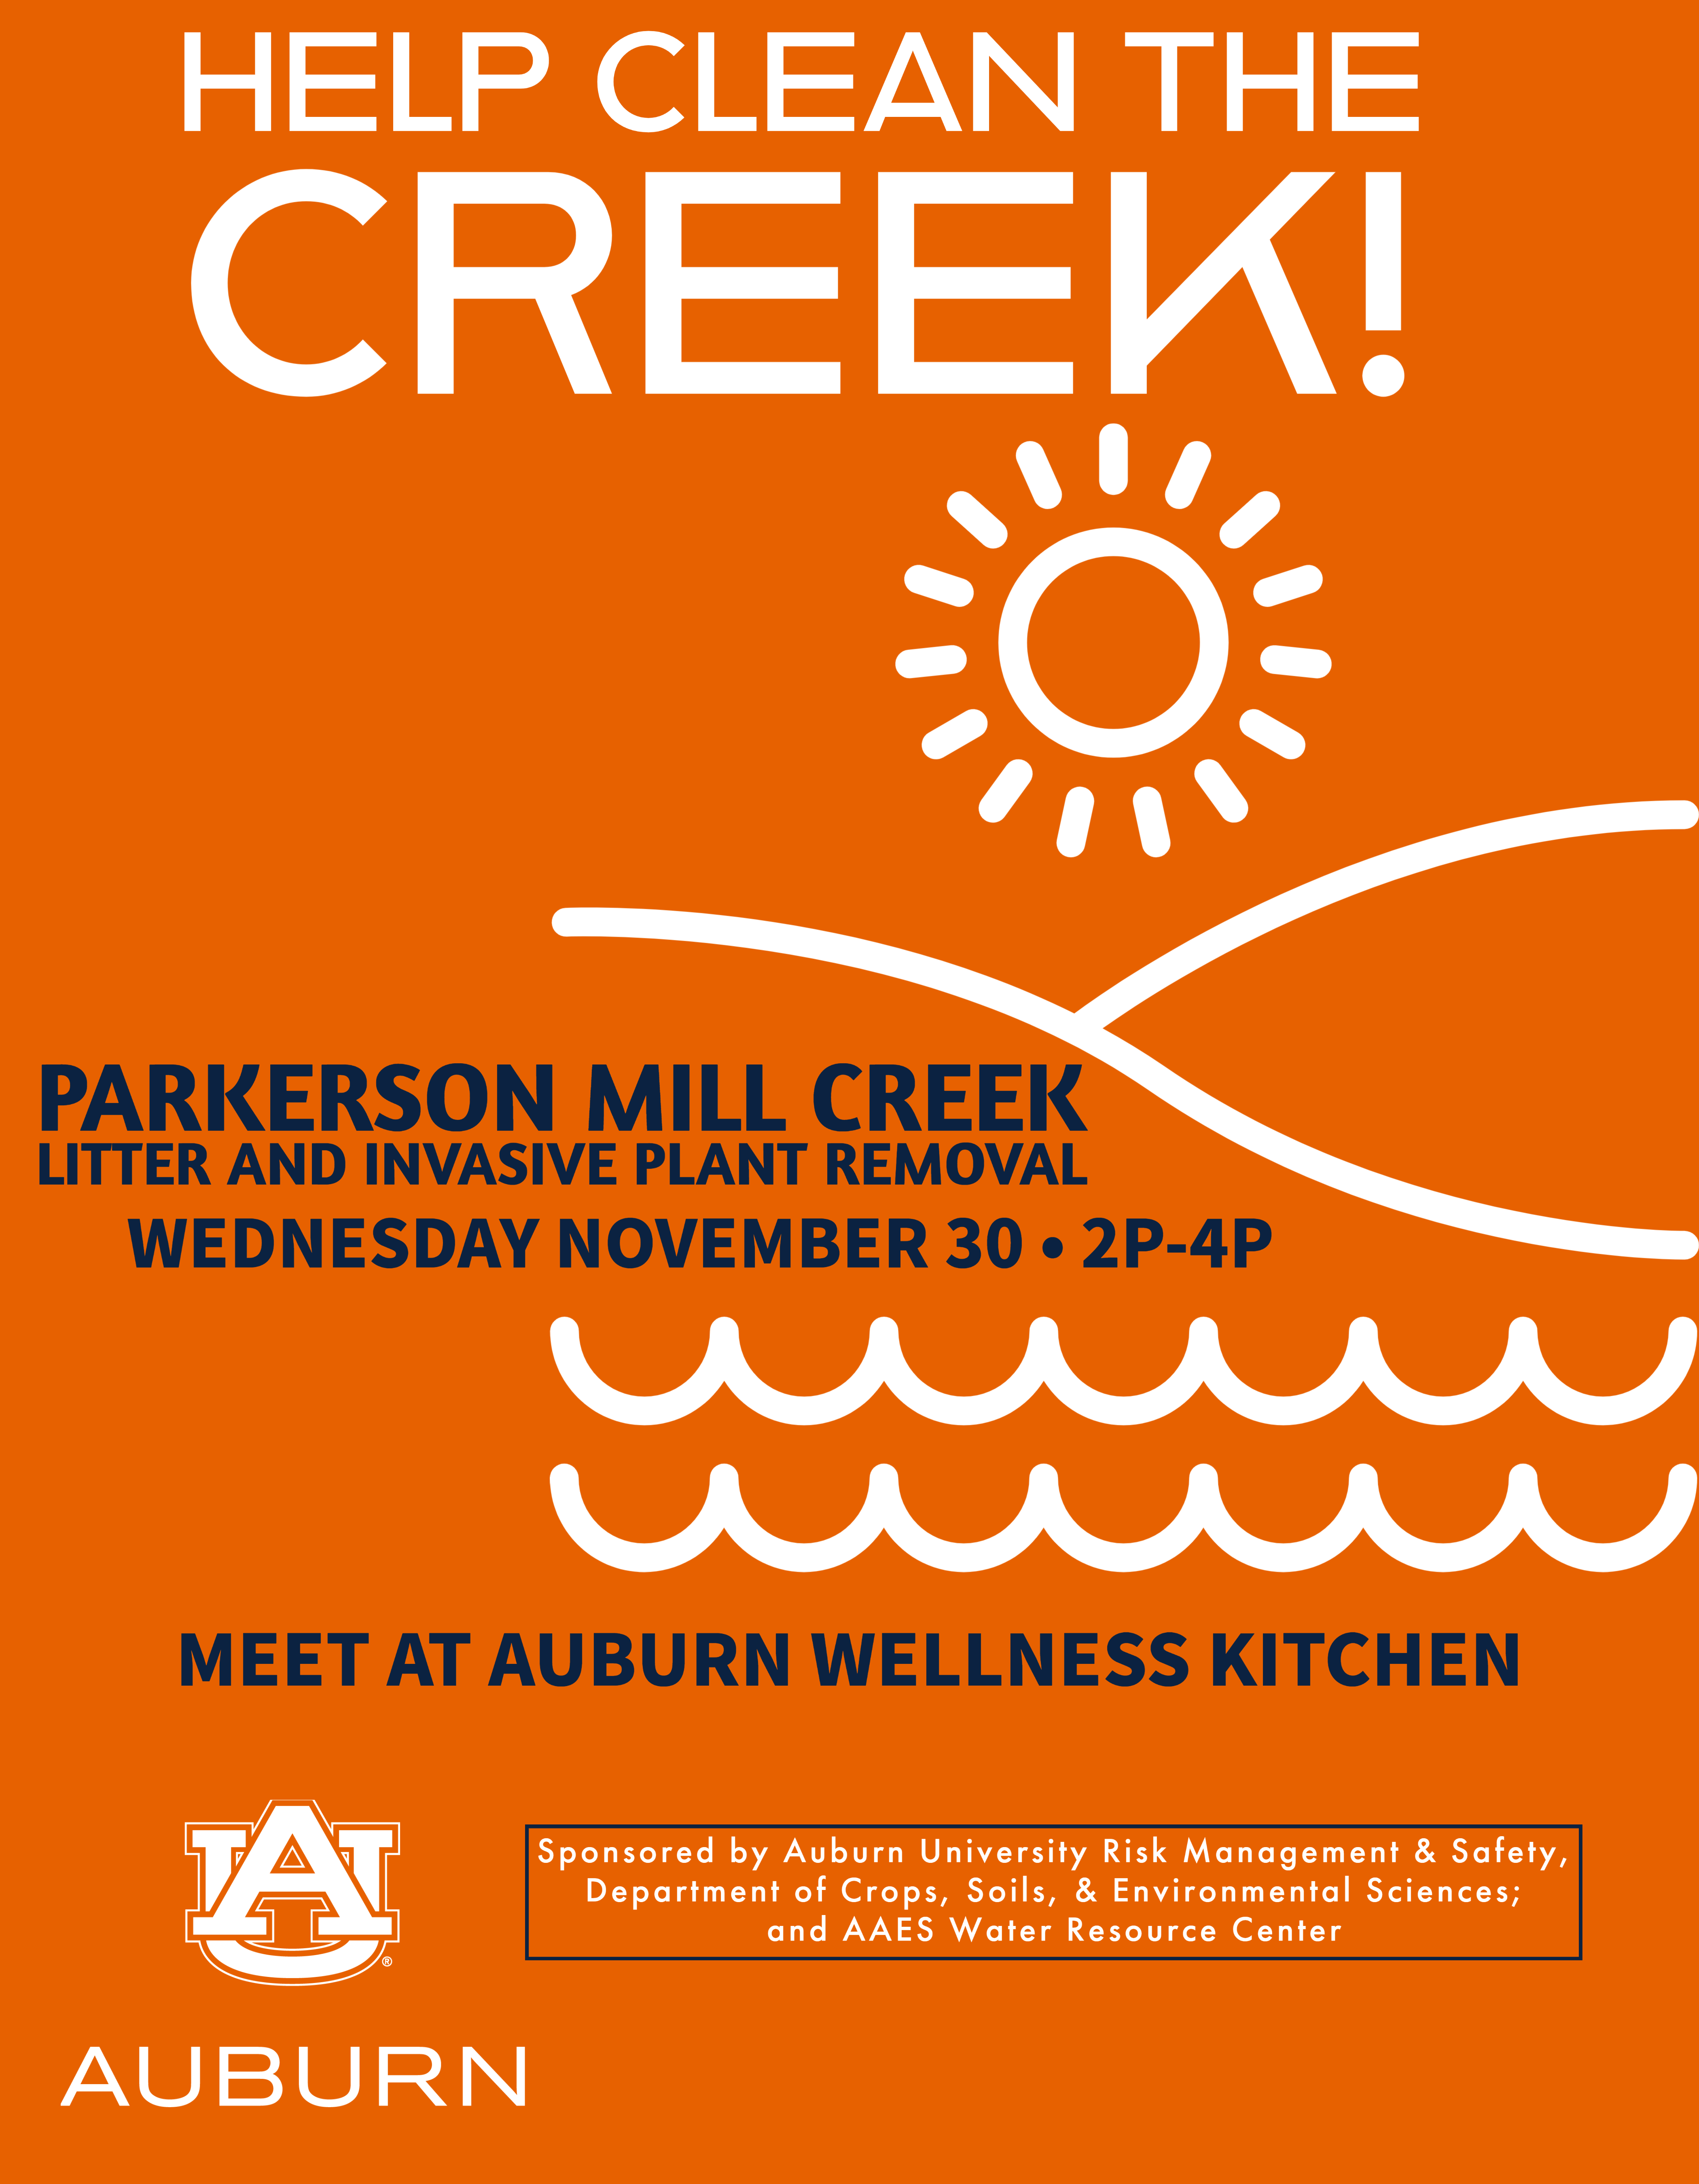 Creek Cleanup on 11/30/22